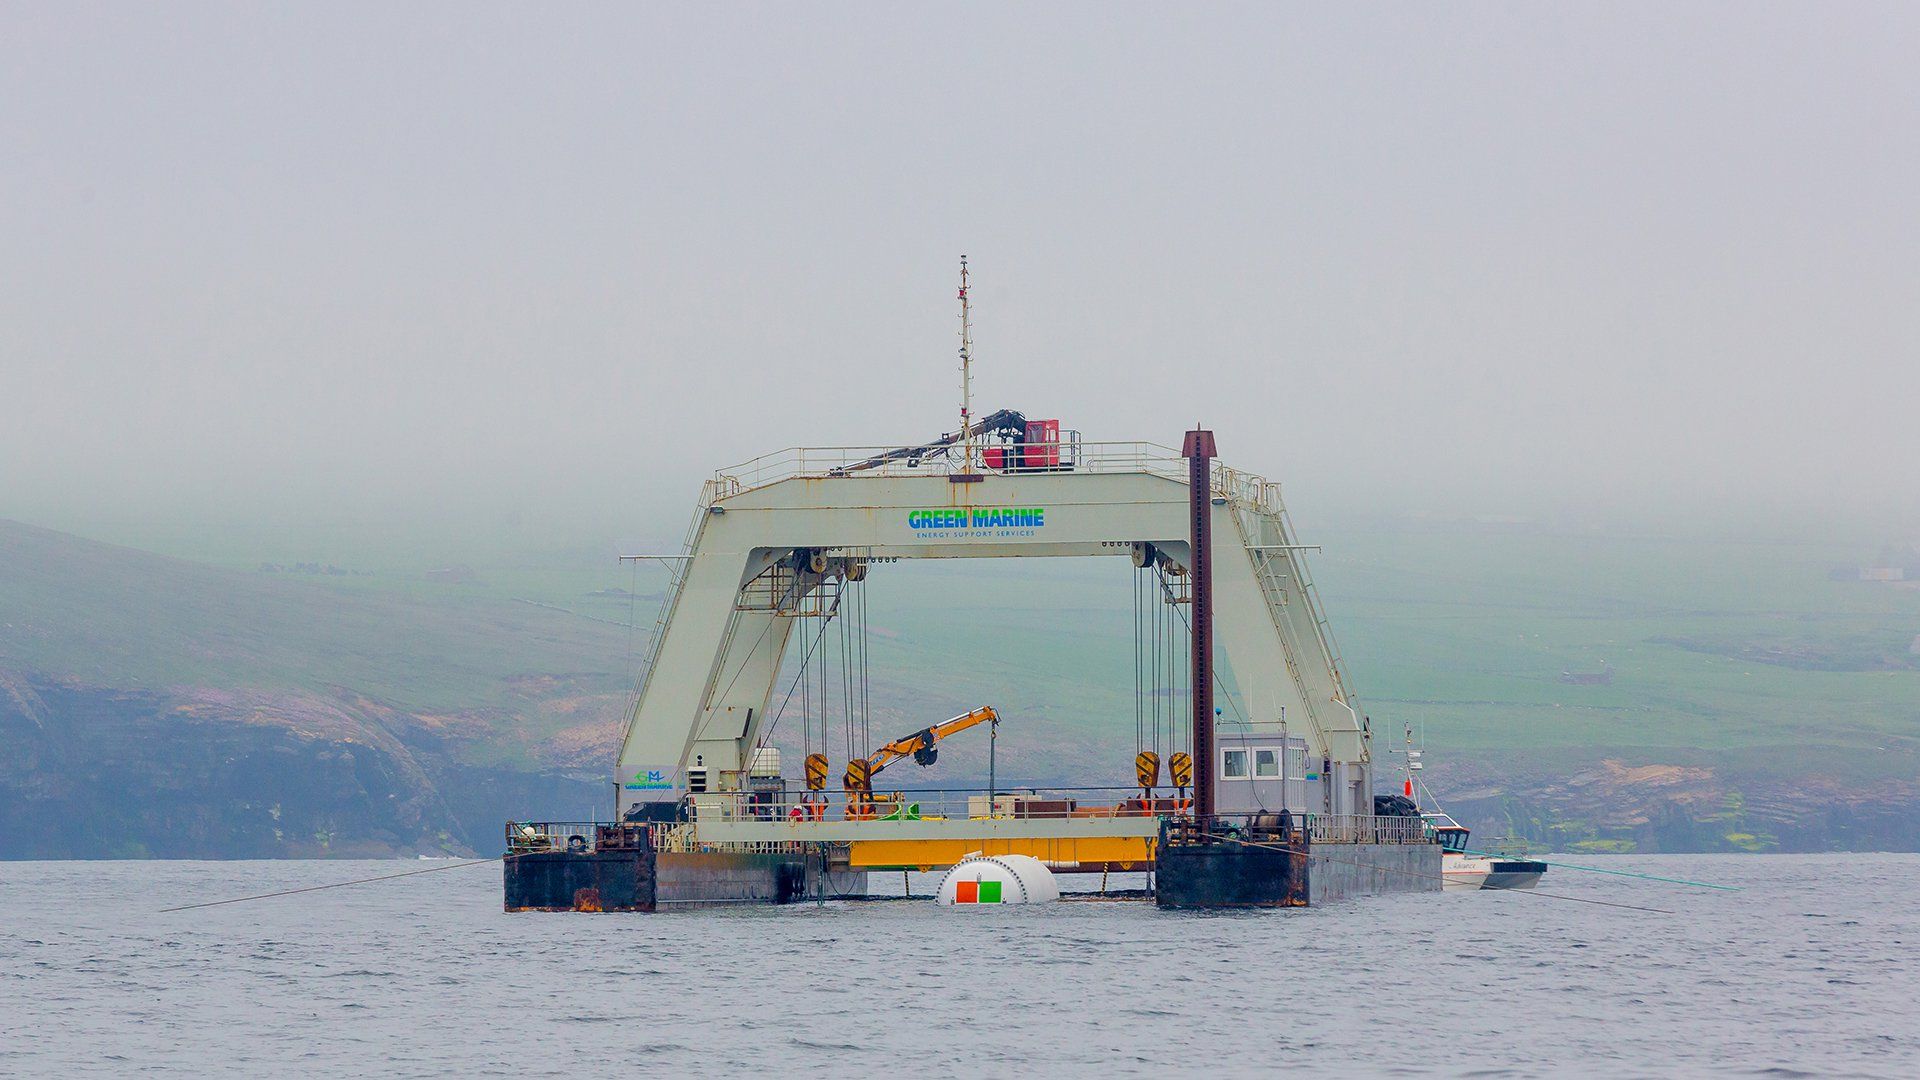 Microsoft installed a data center with 864 servers on the sea floor